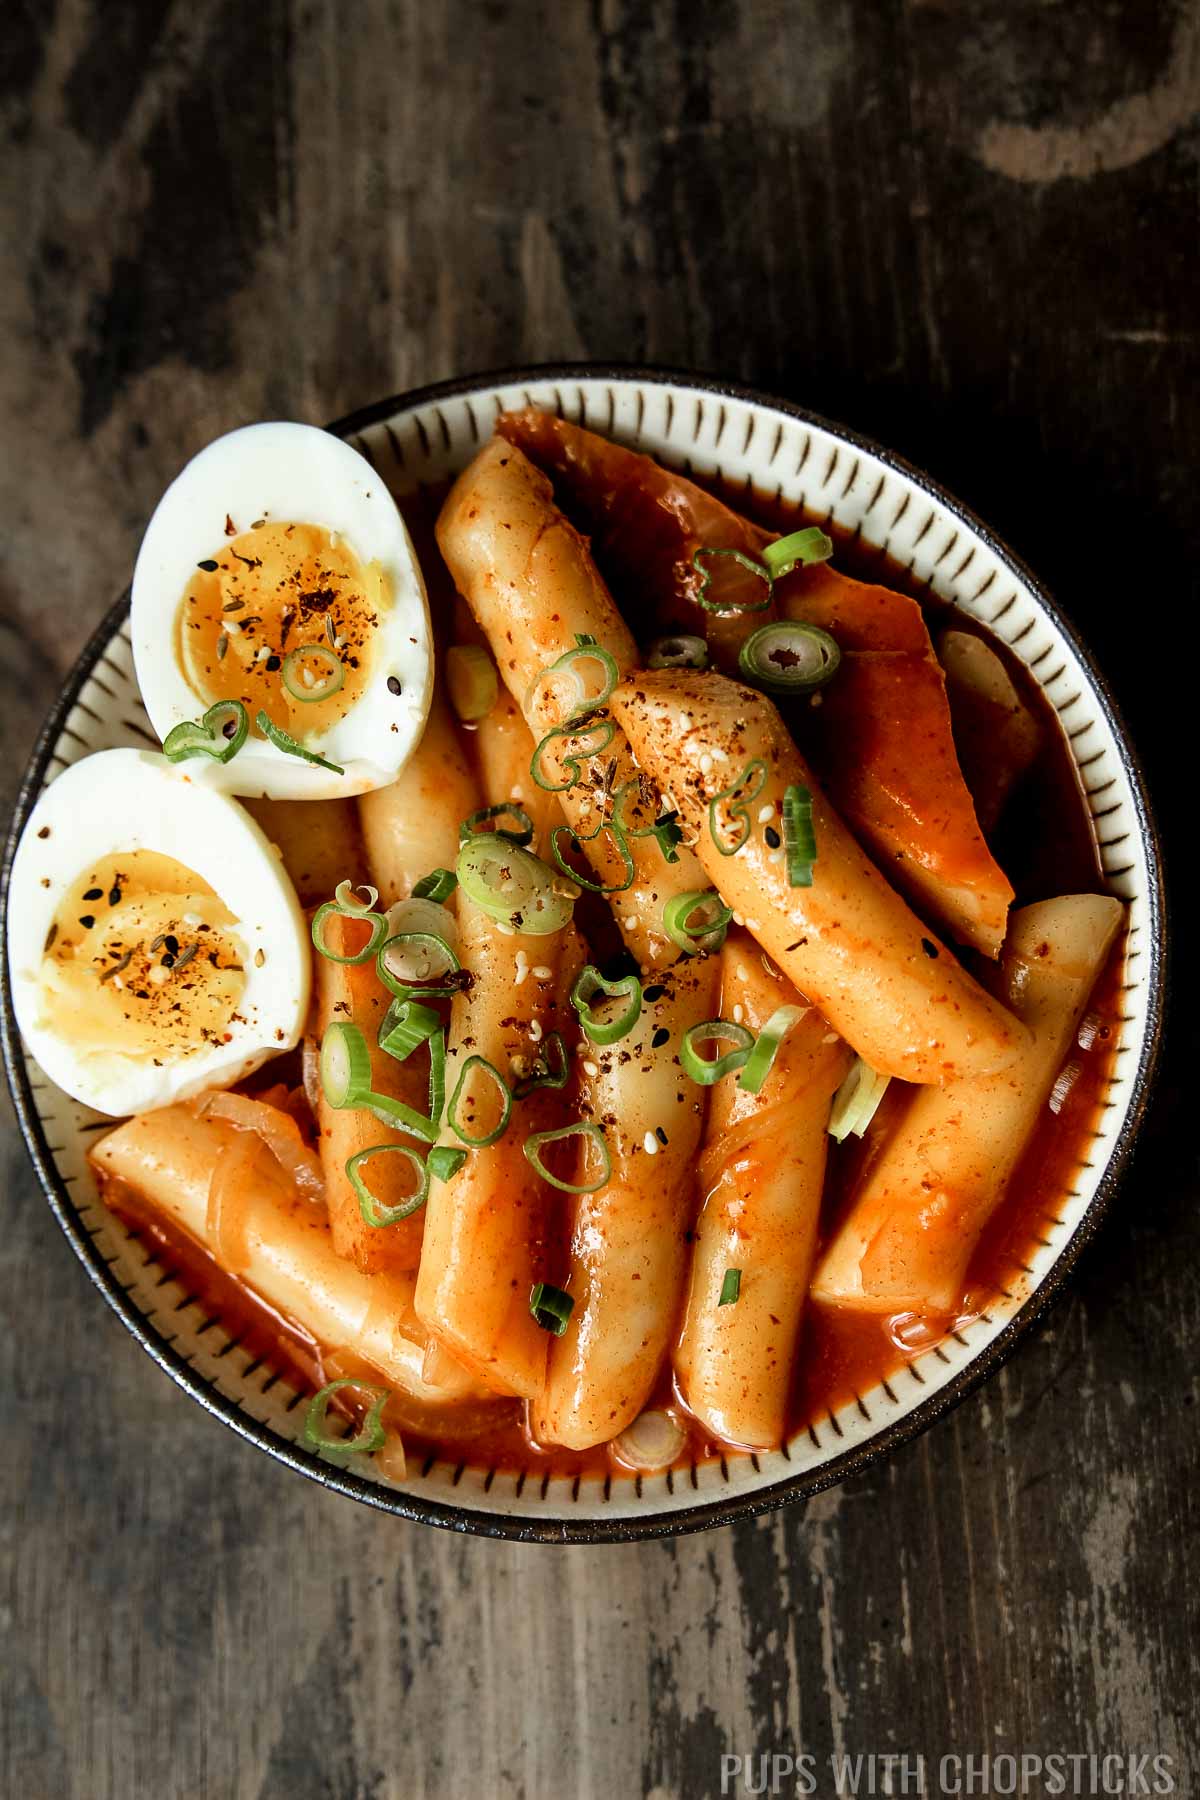 A small bowl of tteokbokki (Spicy korean rice cakes) with medium boiled eggs sliced in half and garnished with green onions